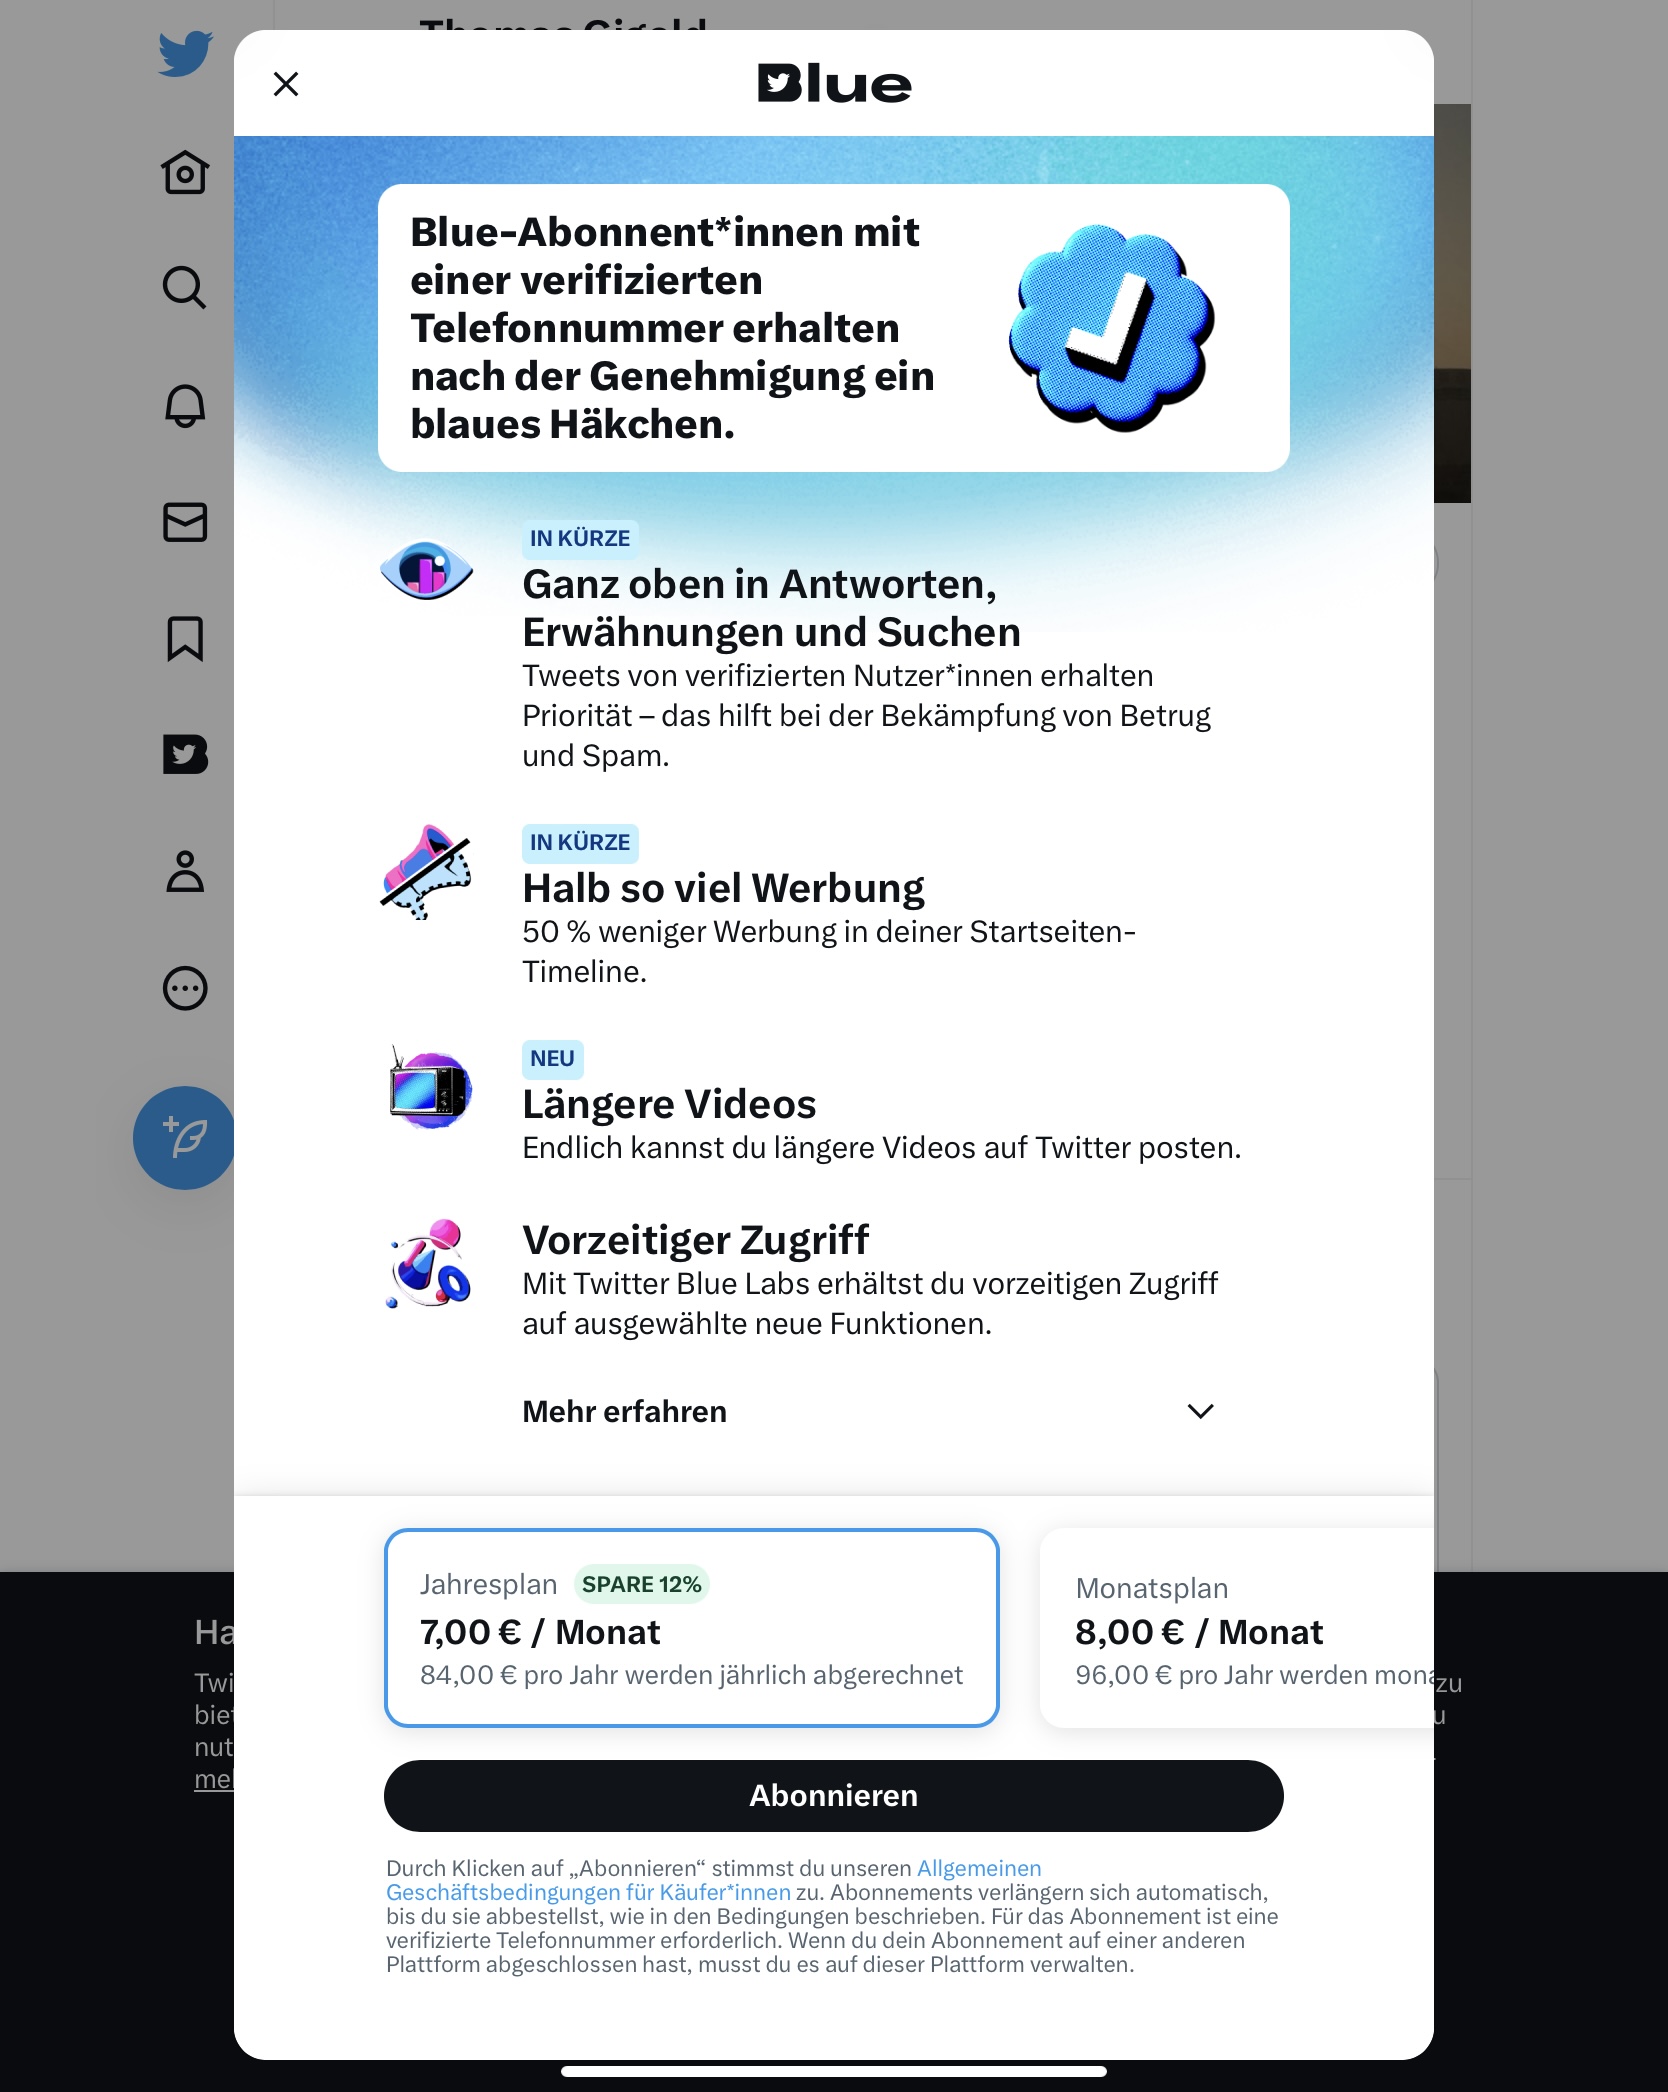 Twitter Blue is available in Germany